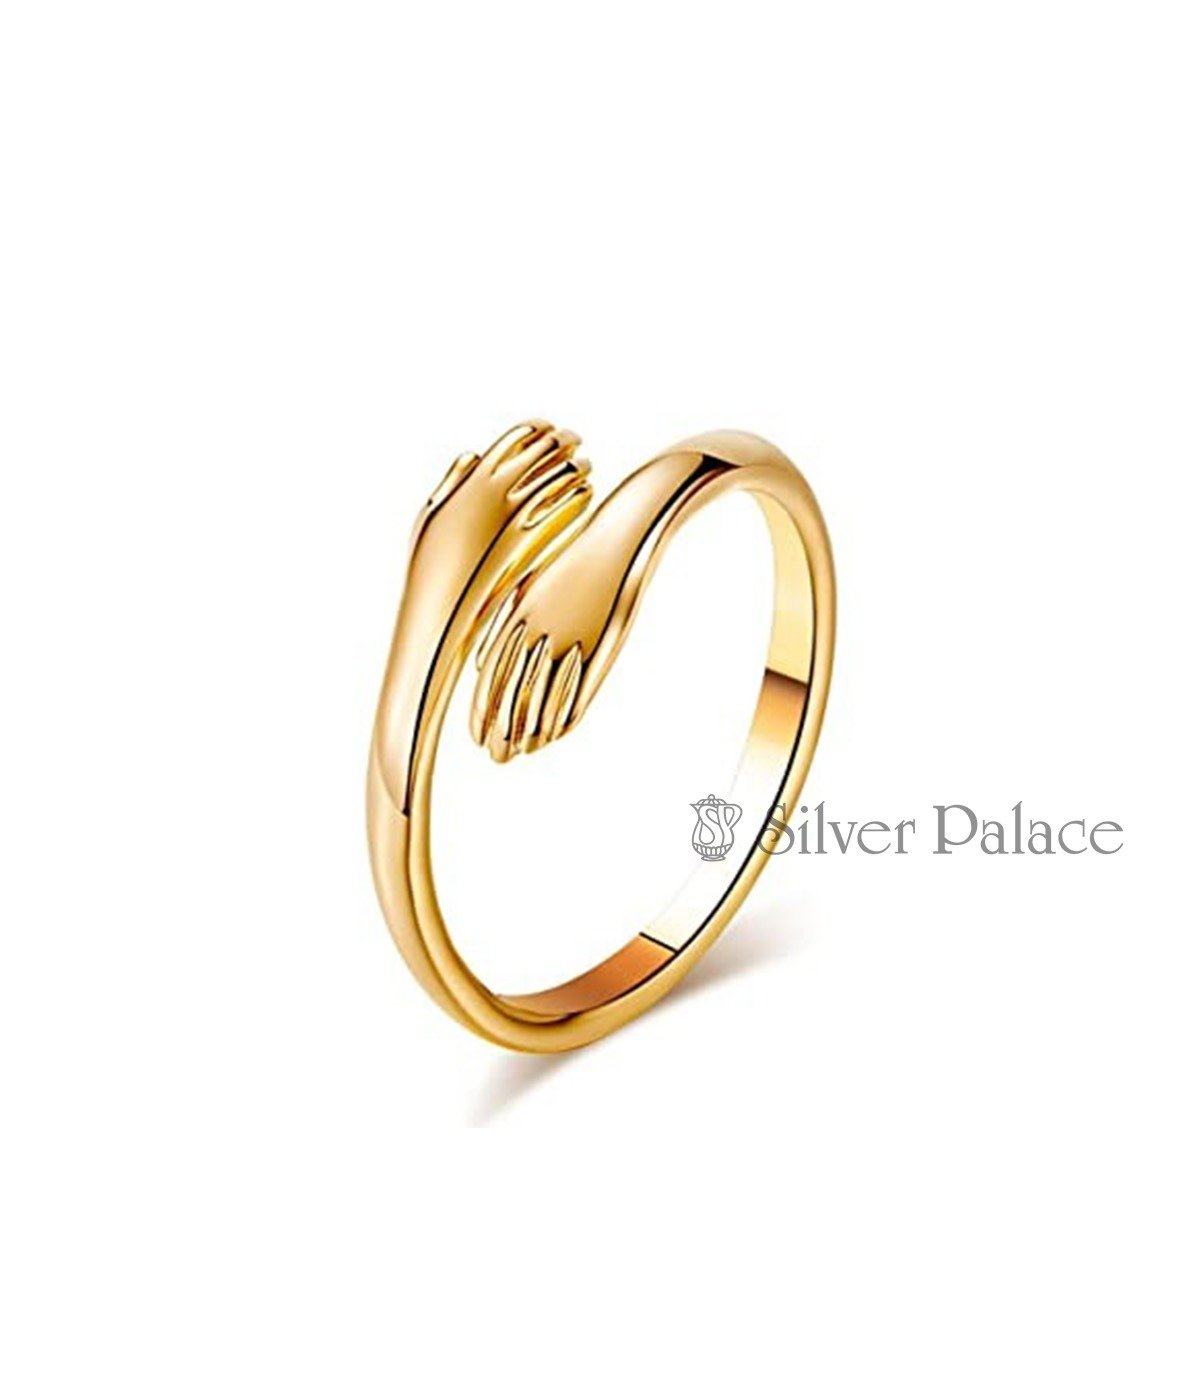 18 KT PURE GOLD VALENTINE DAY COUPLE HUG RING 